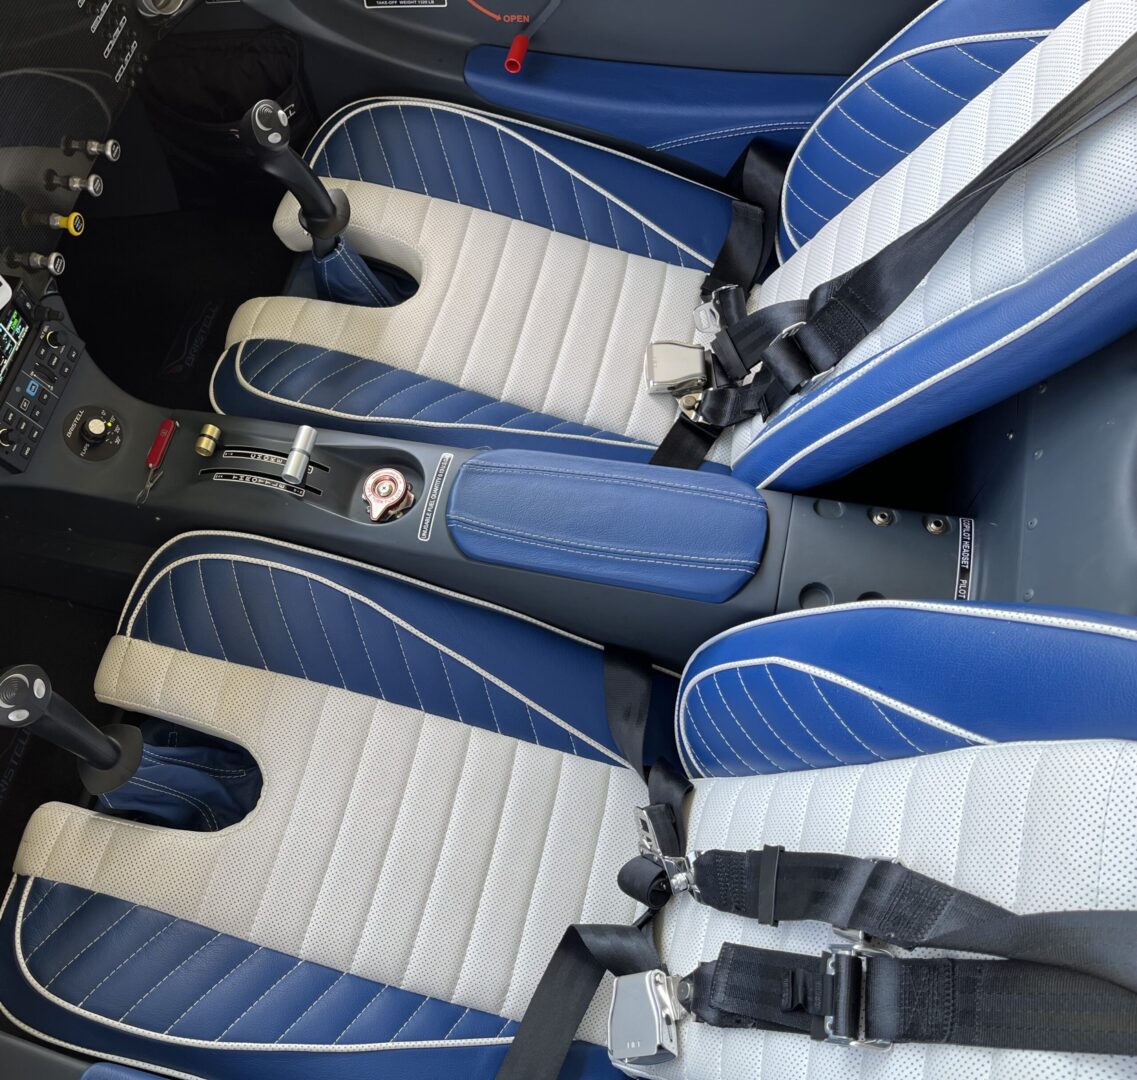 A car seat with blue and white leather